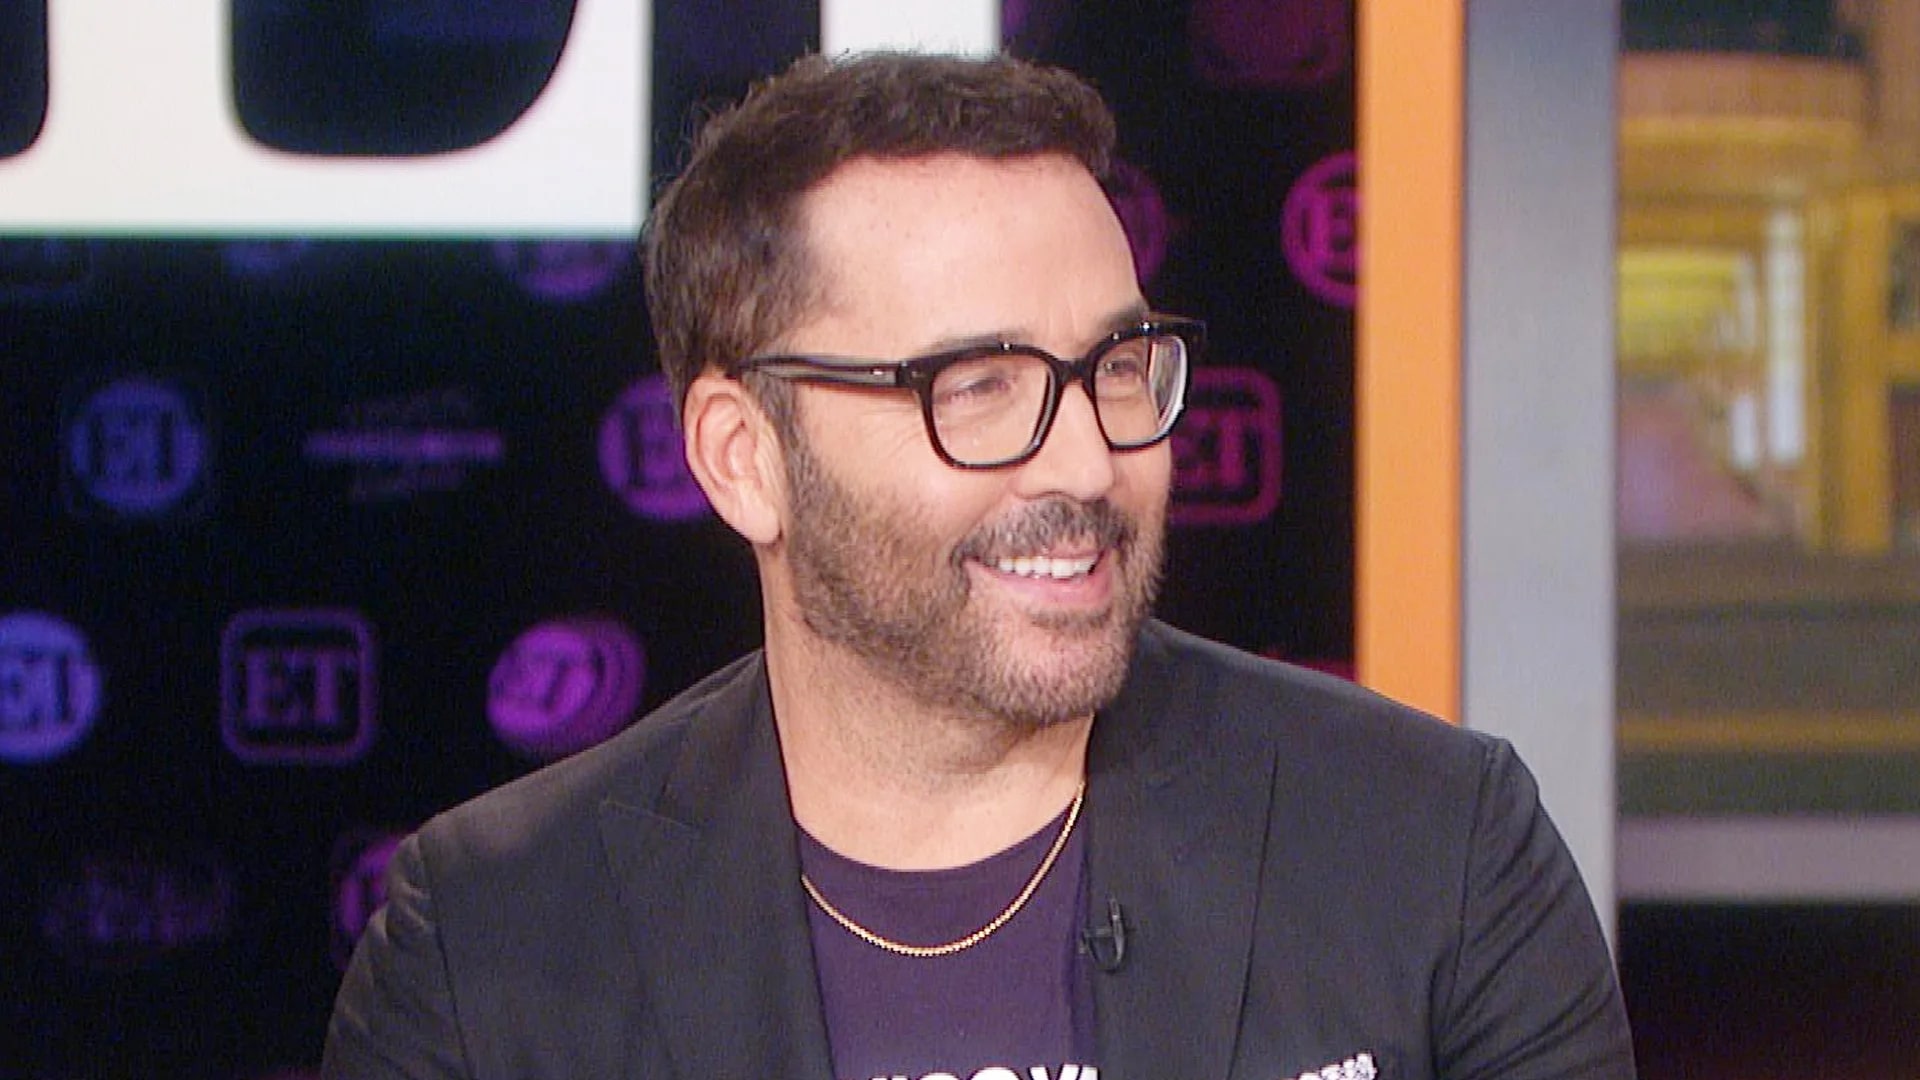 Jeremy Piven’s Best Interviews And Talk Show Appearances